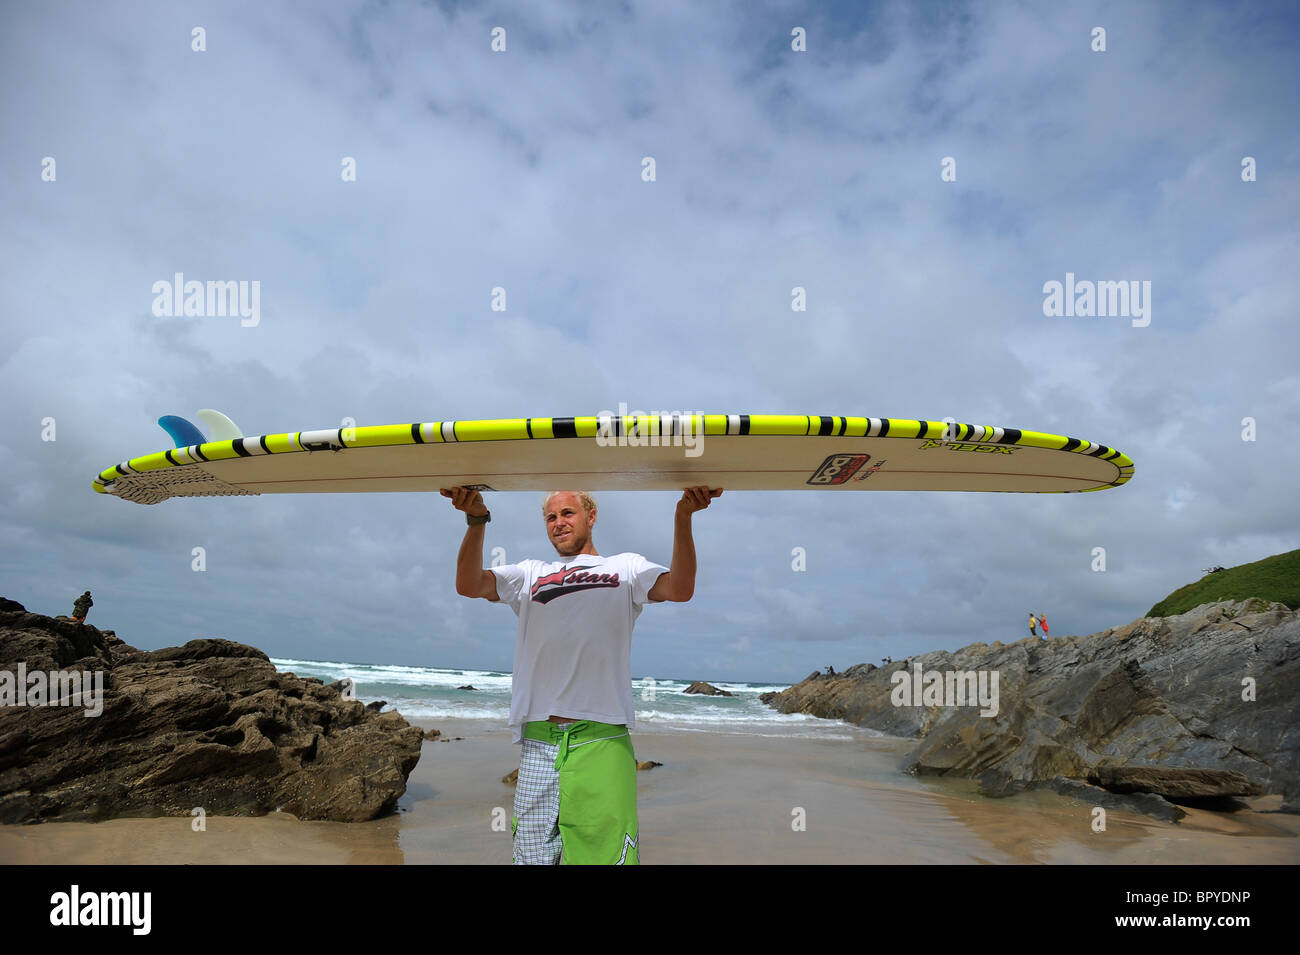 A surfer, Ben Howey, holding a longboard surfboard on the beach at Fistral, Newquay, the UK's surfing capital, in Cornwall Stock Photo